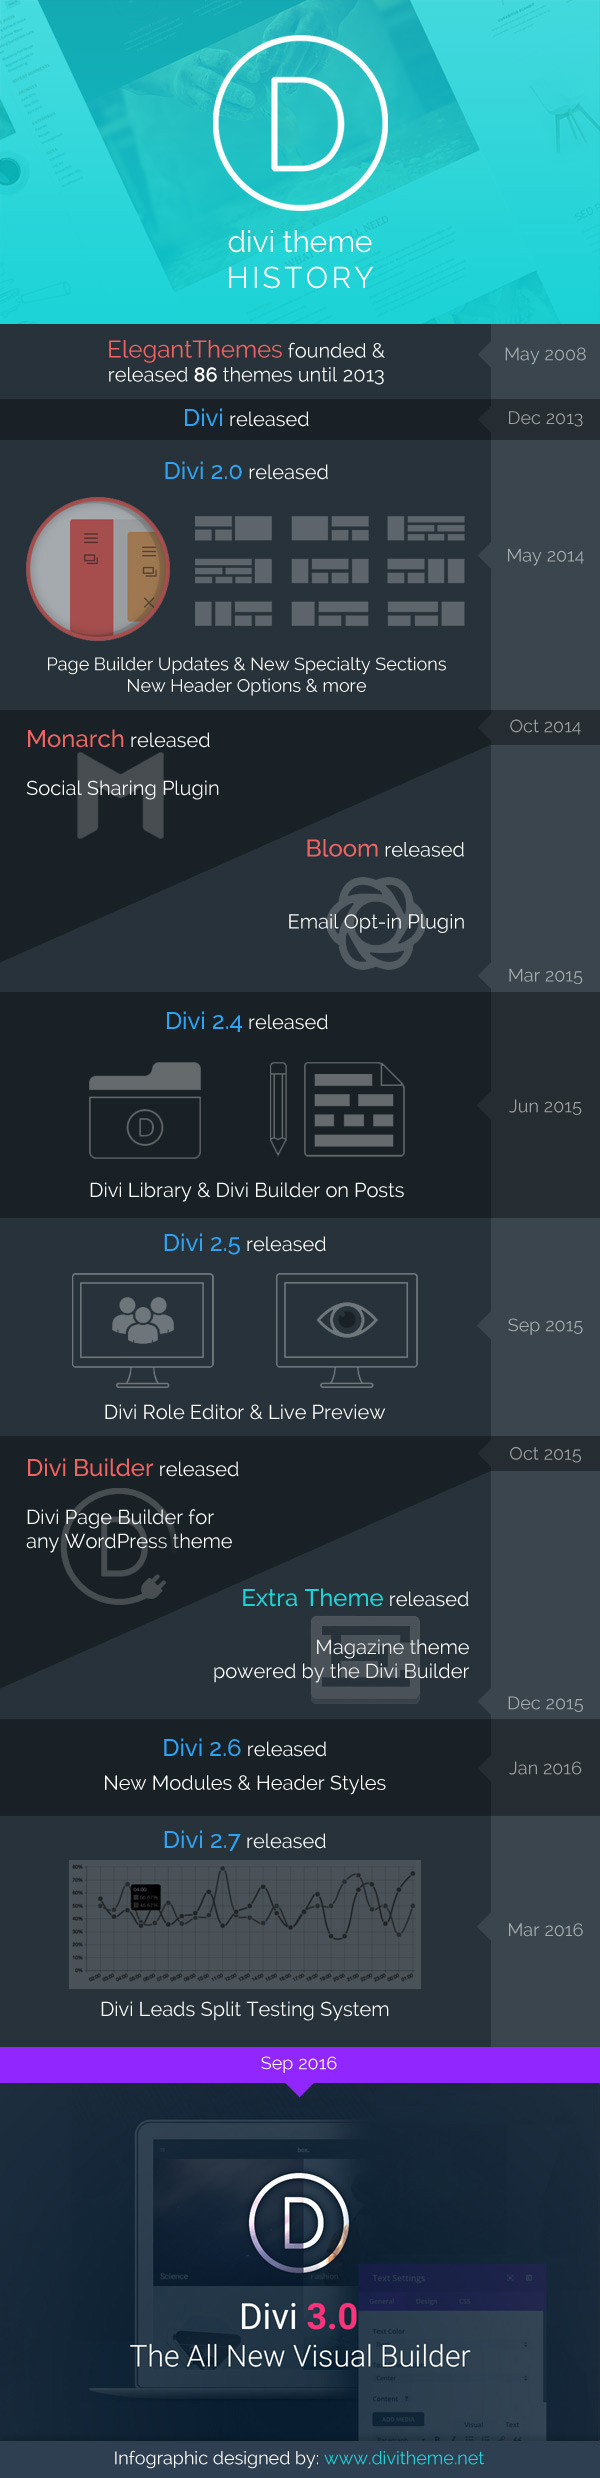 Divi History Infographic by Andrej (http://divitheme.net/)